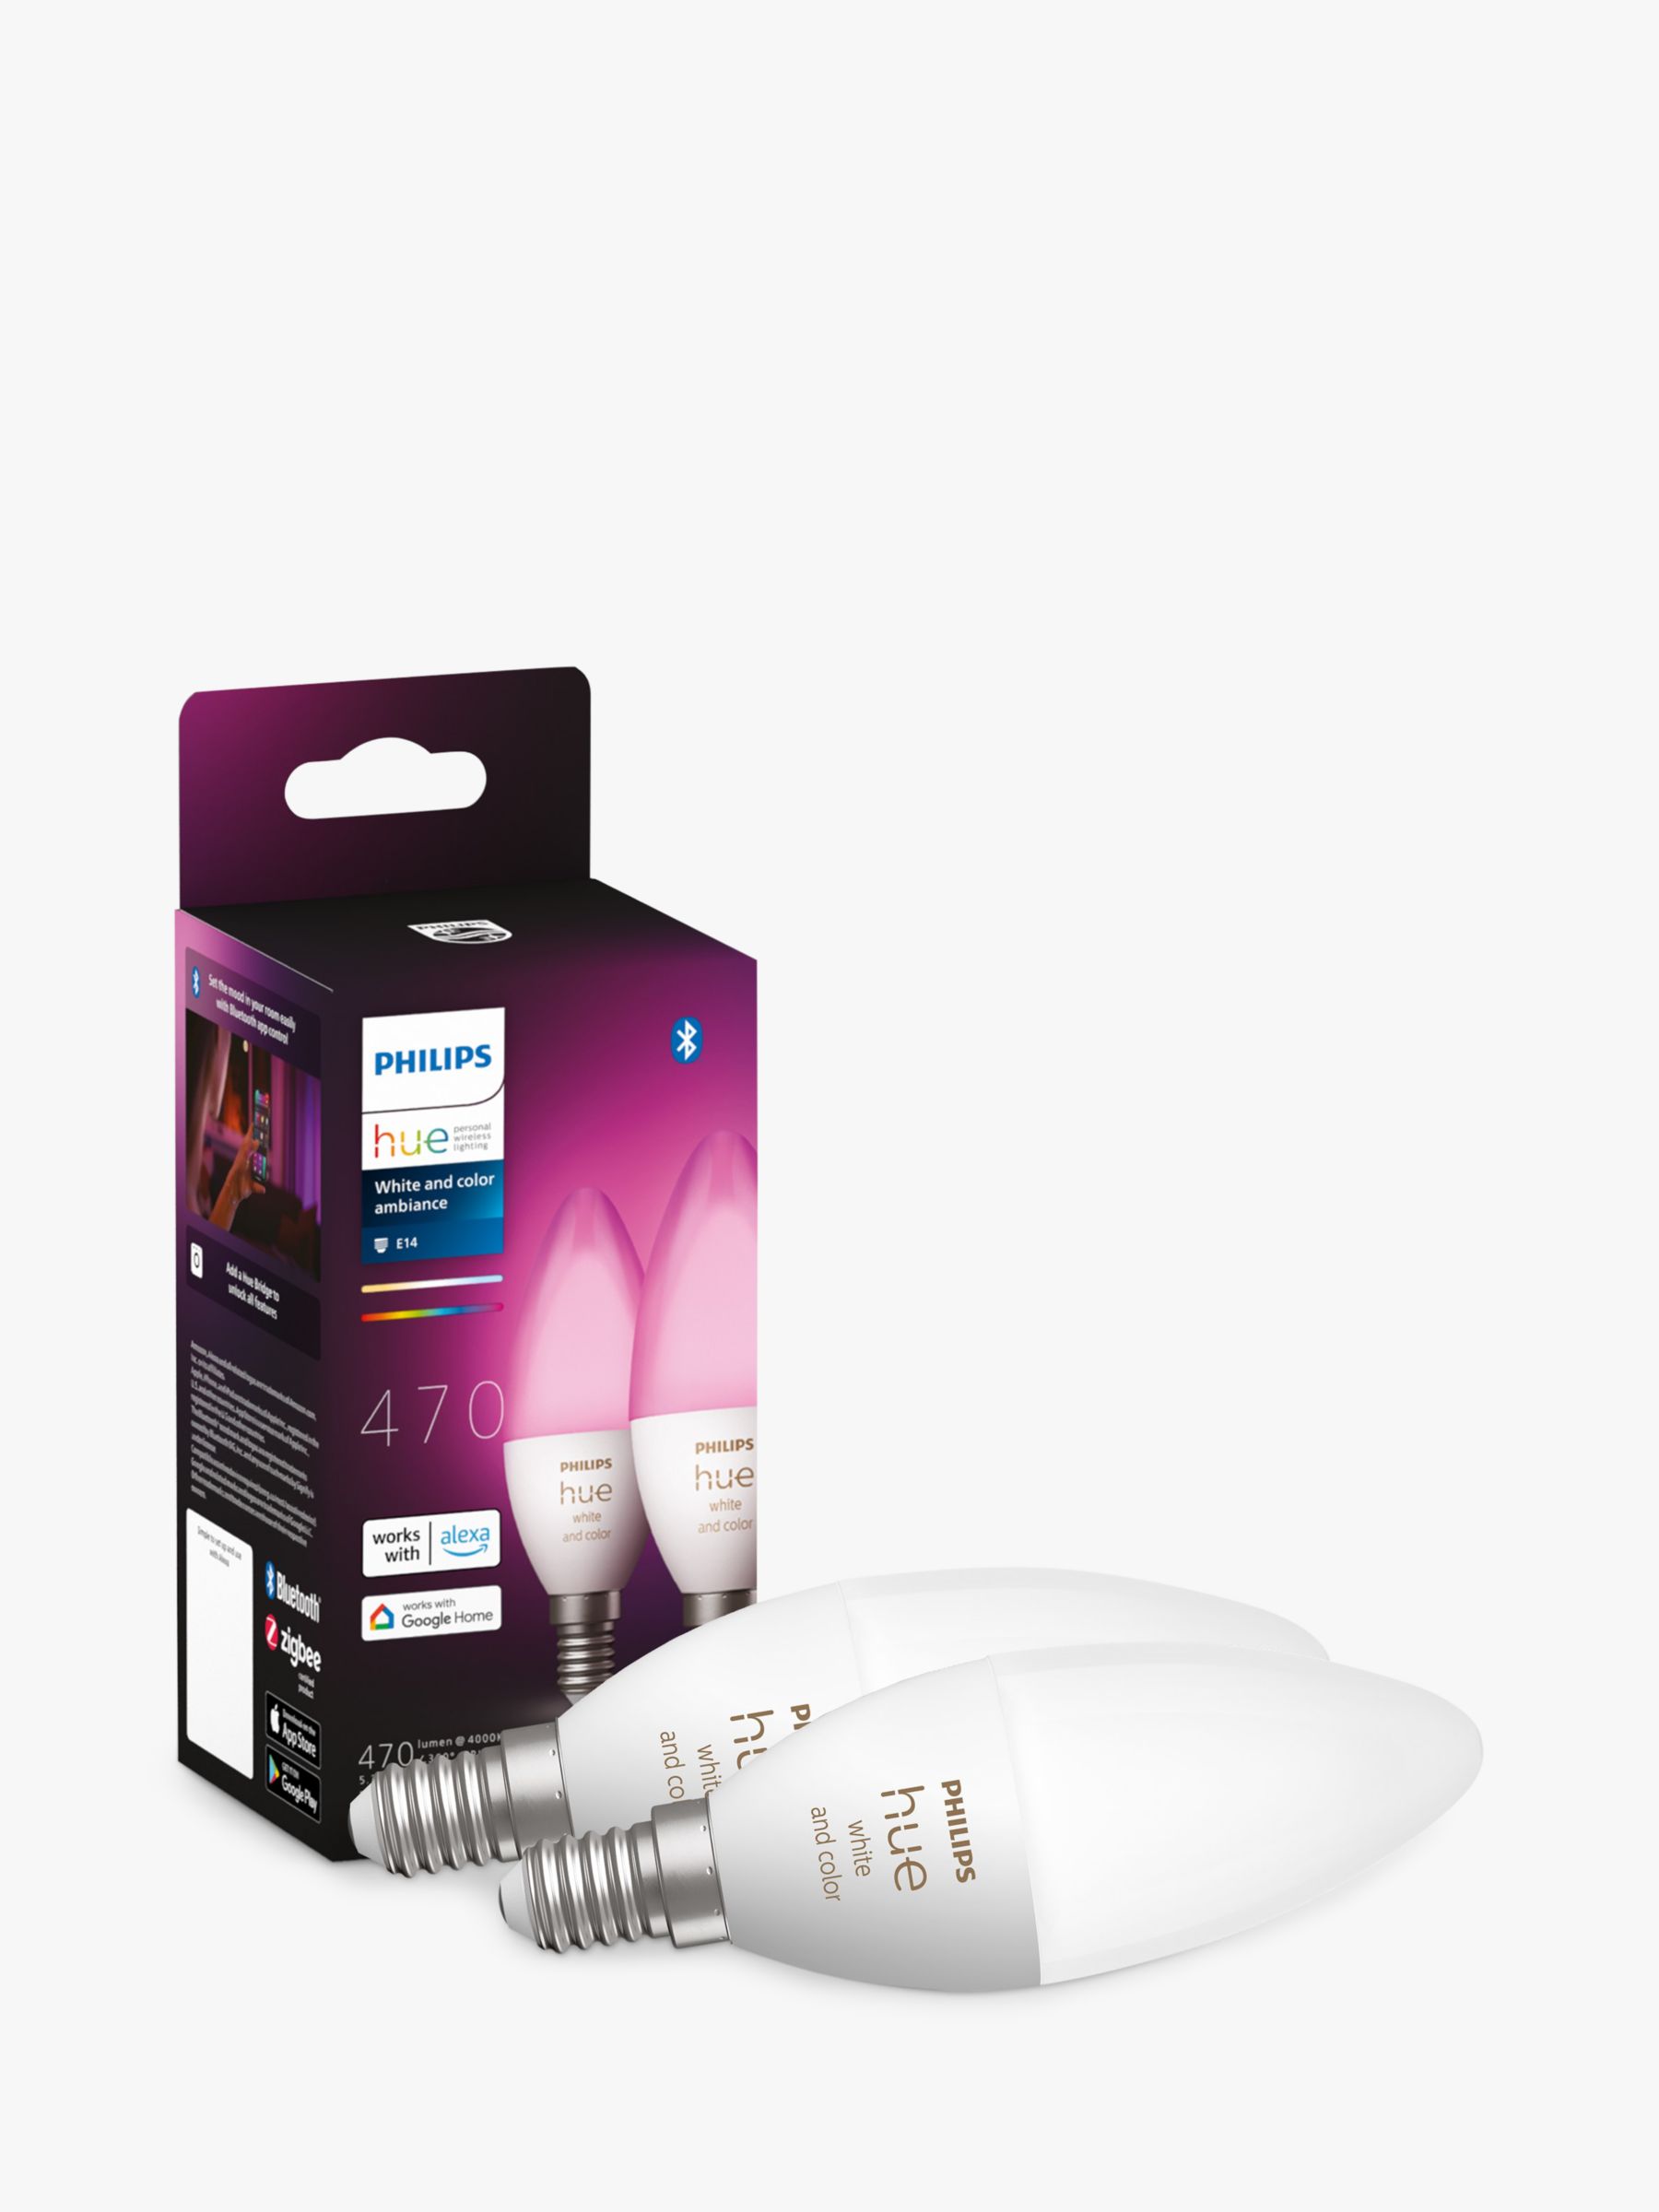 Philips Hue White and Colour Ambiance Wireless Lighting LED Colour Changing  Light Bulb with Bluetooth, 6.5W B39 E14 Small Edison Screw Bulb, Single